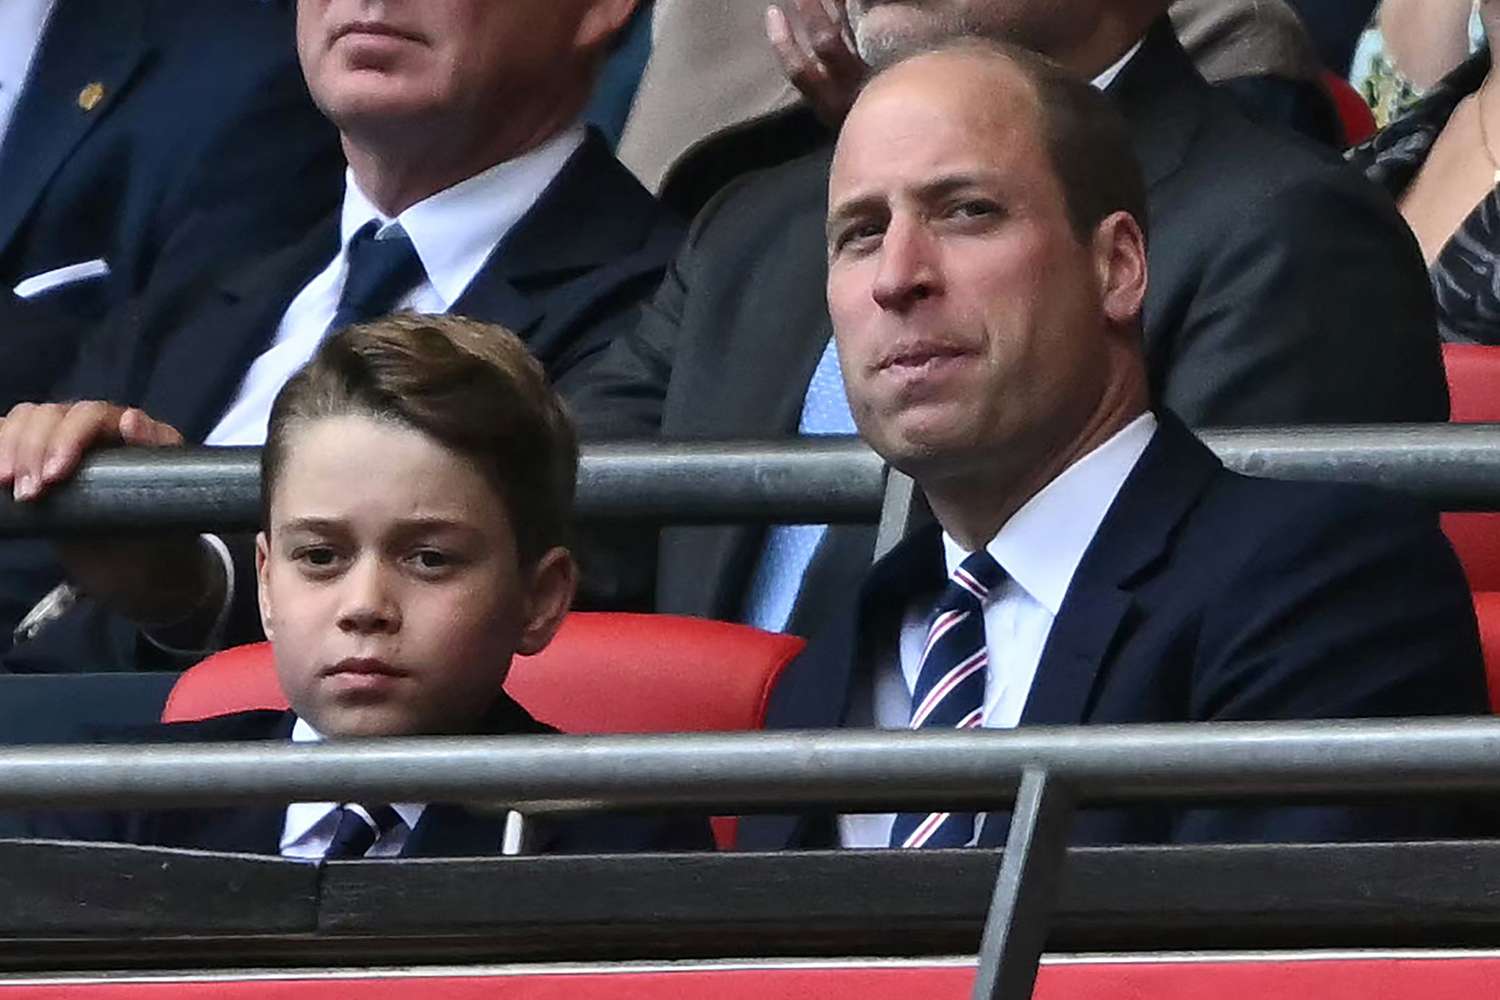 Prince William Attends Soccer Championship with Prince George After Canceling Royal Duties